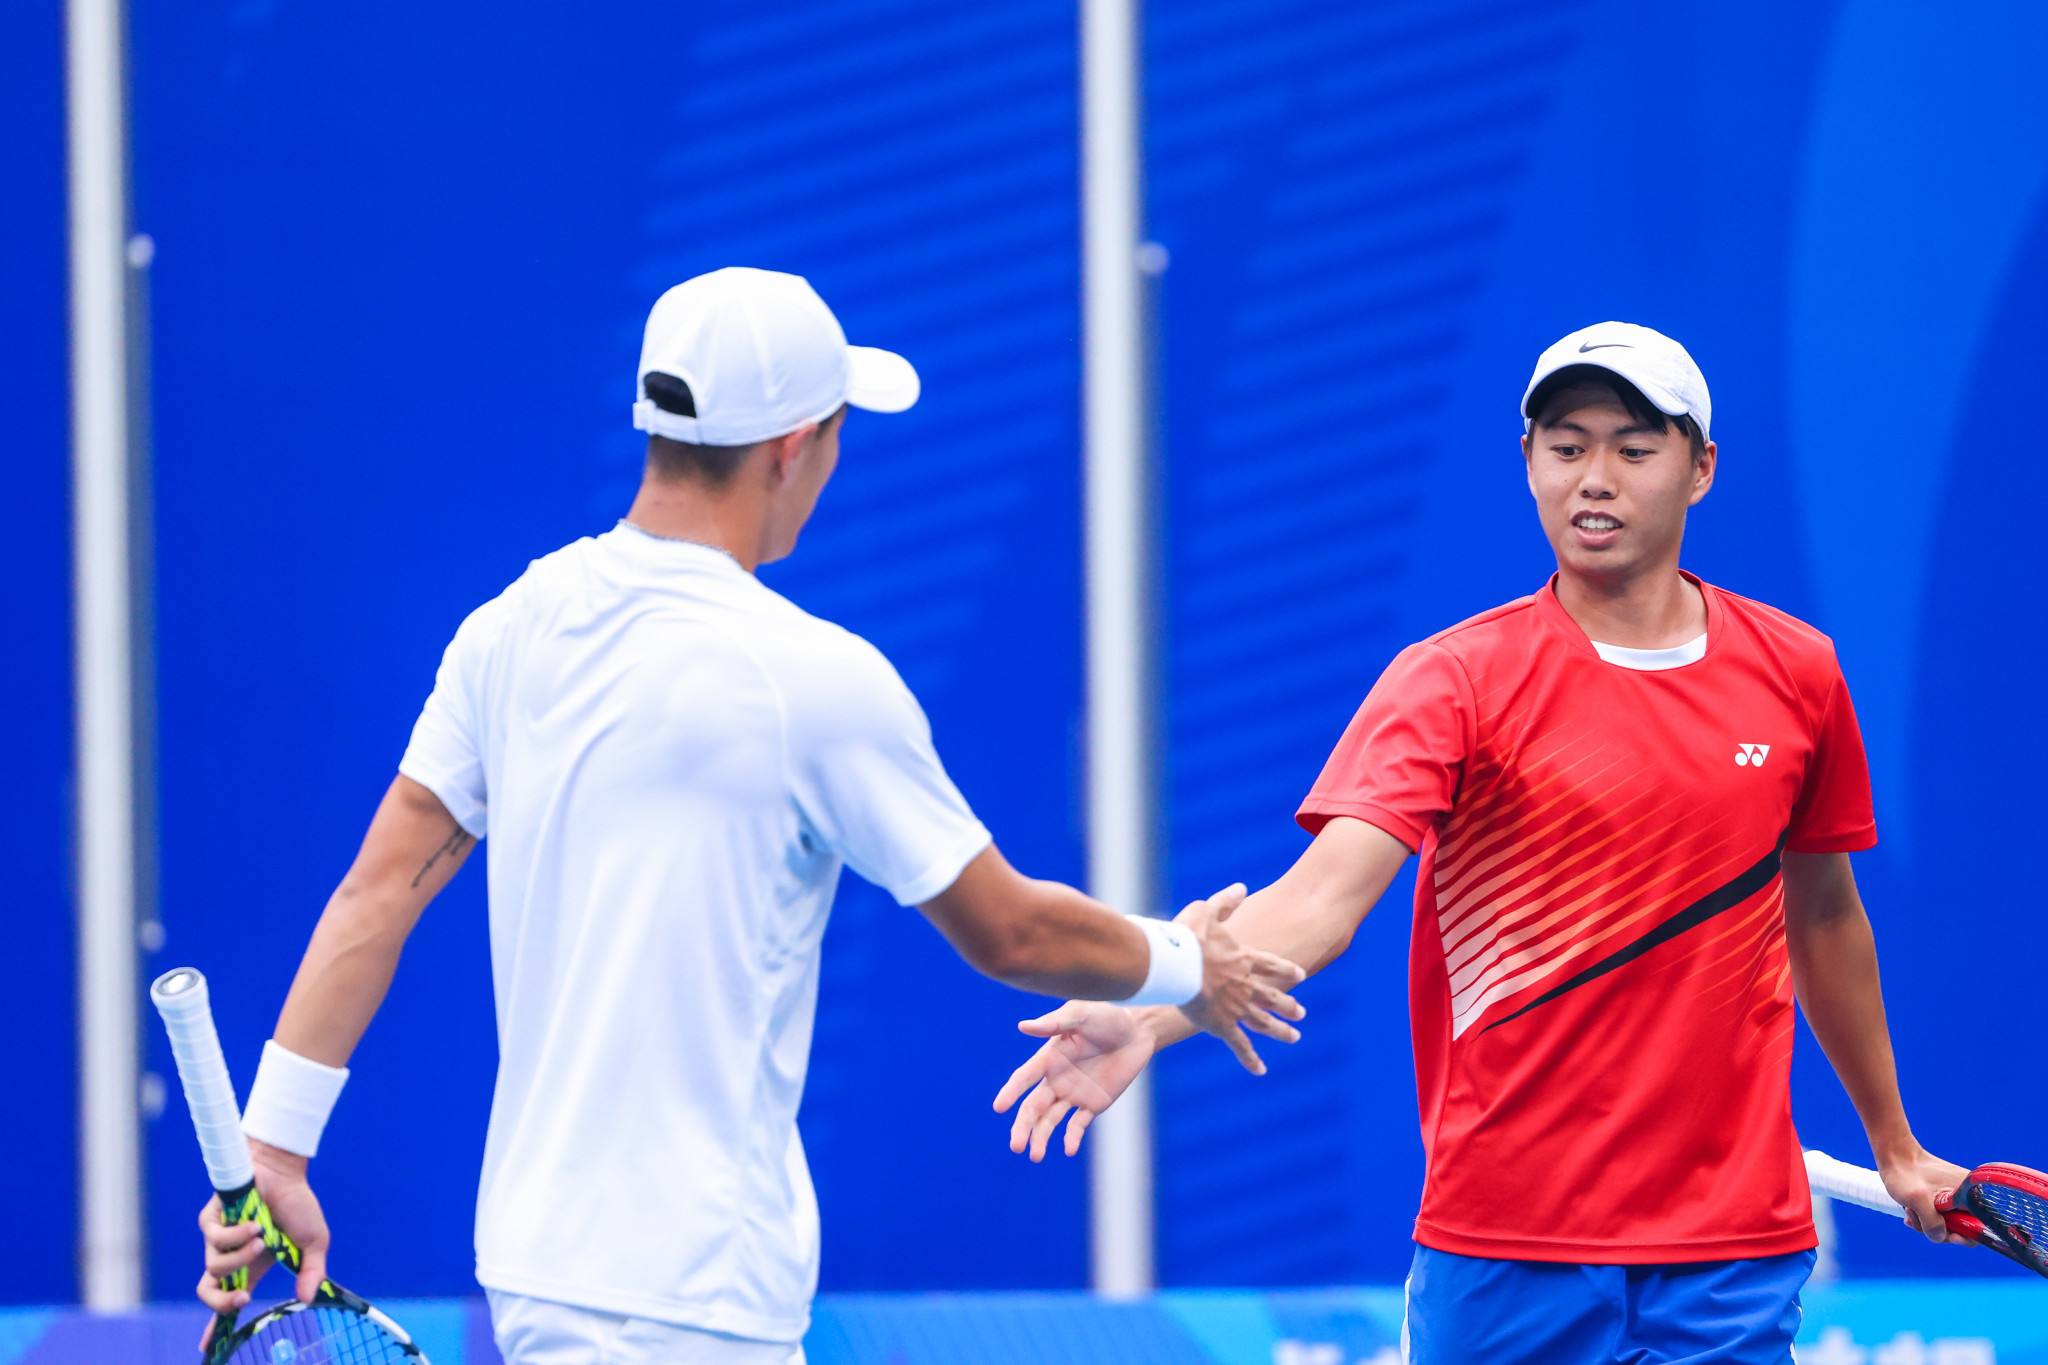 Chinese Taipei win men's doubles tennis title at Chengdu 2021 